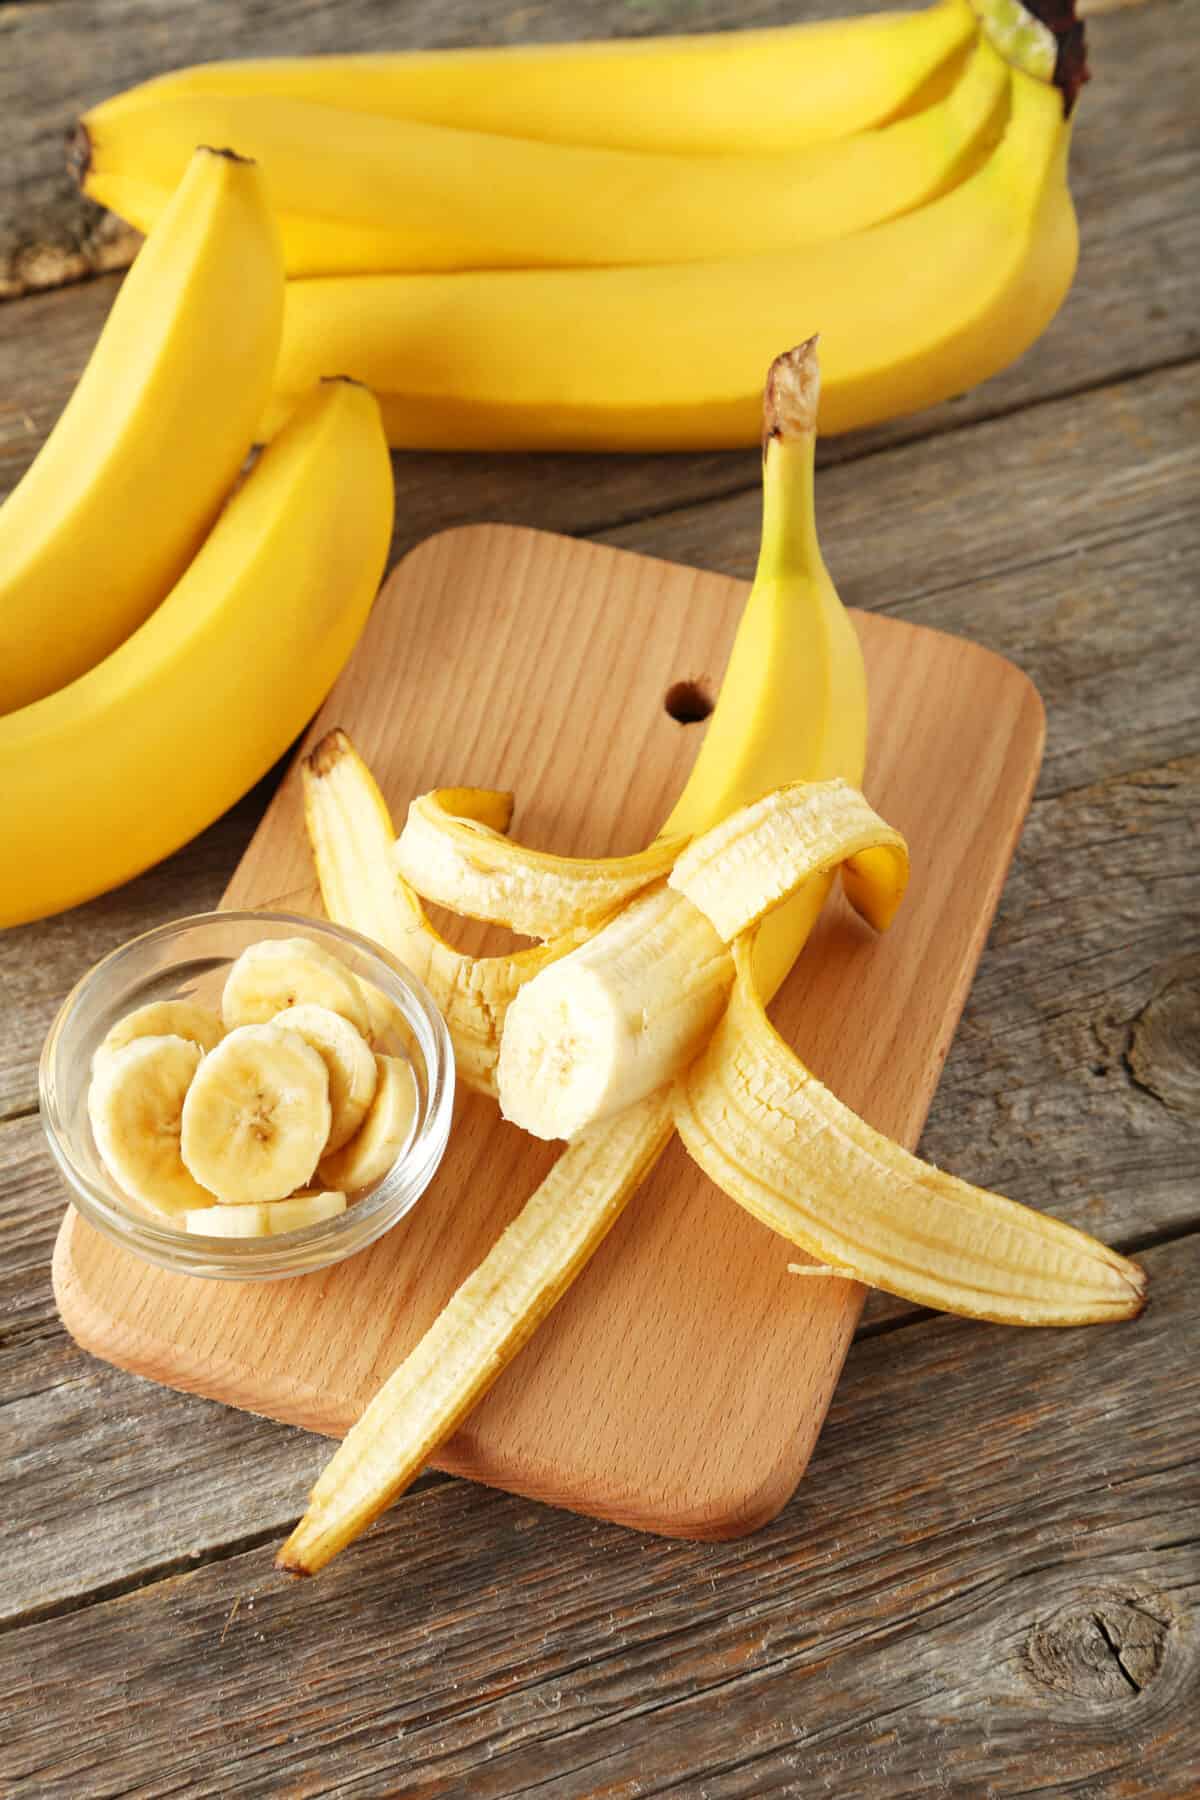 banana bunches and an open banana on a wooden cutting board